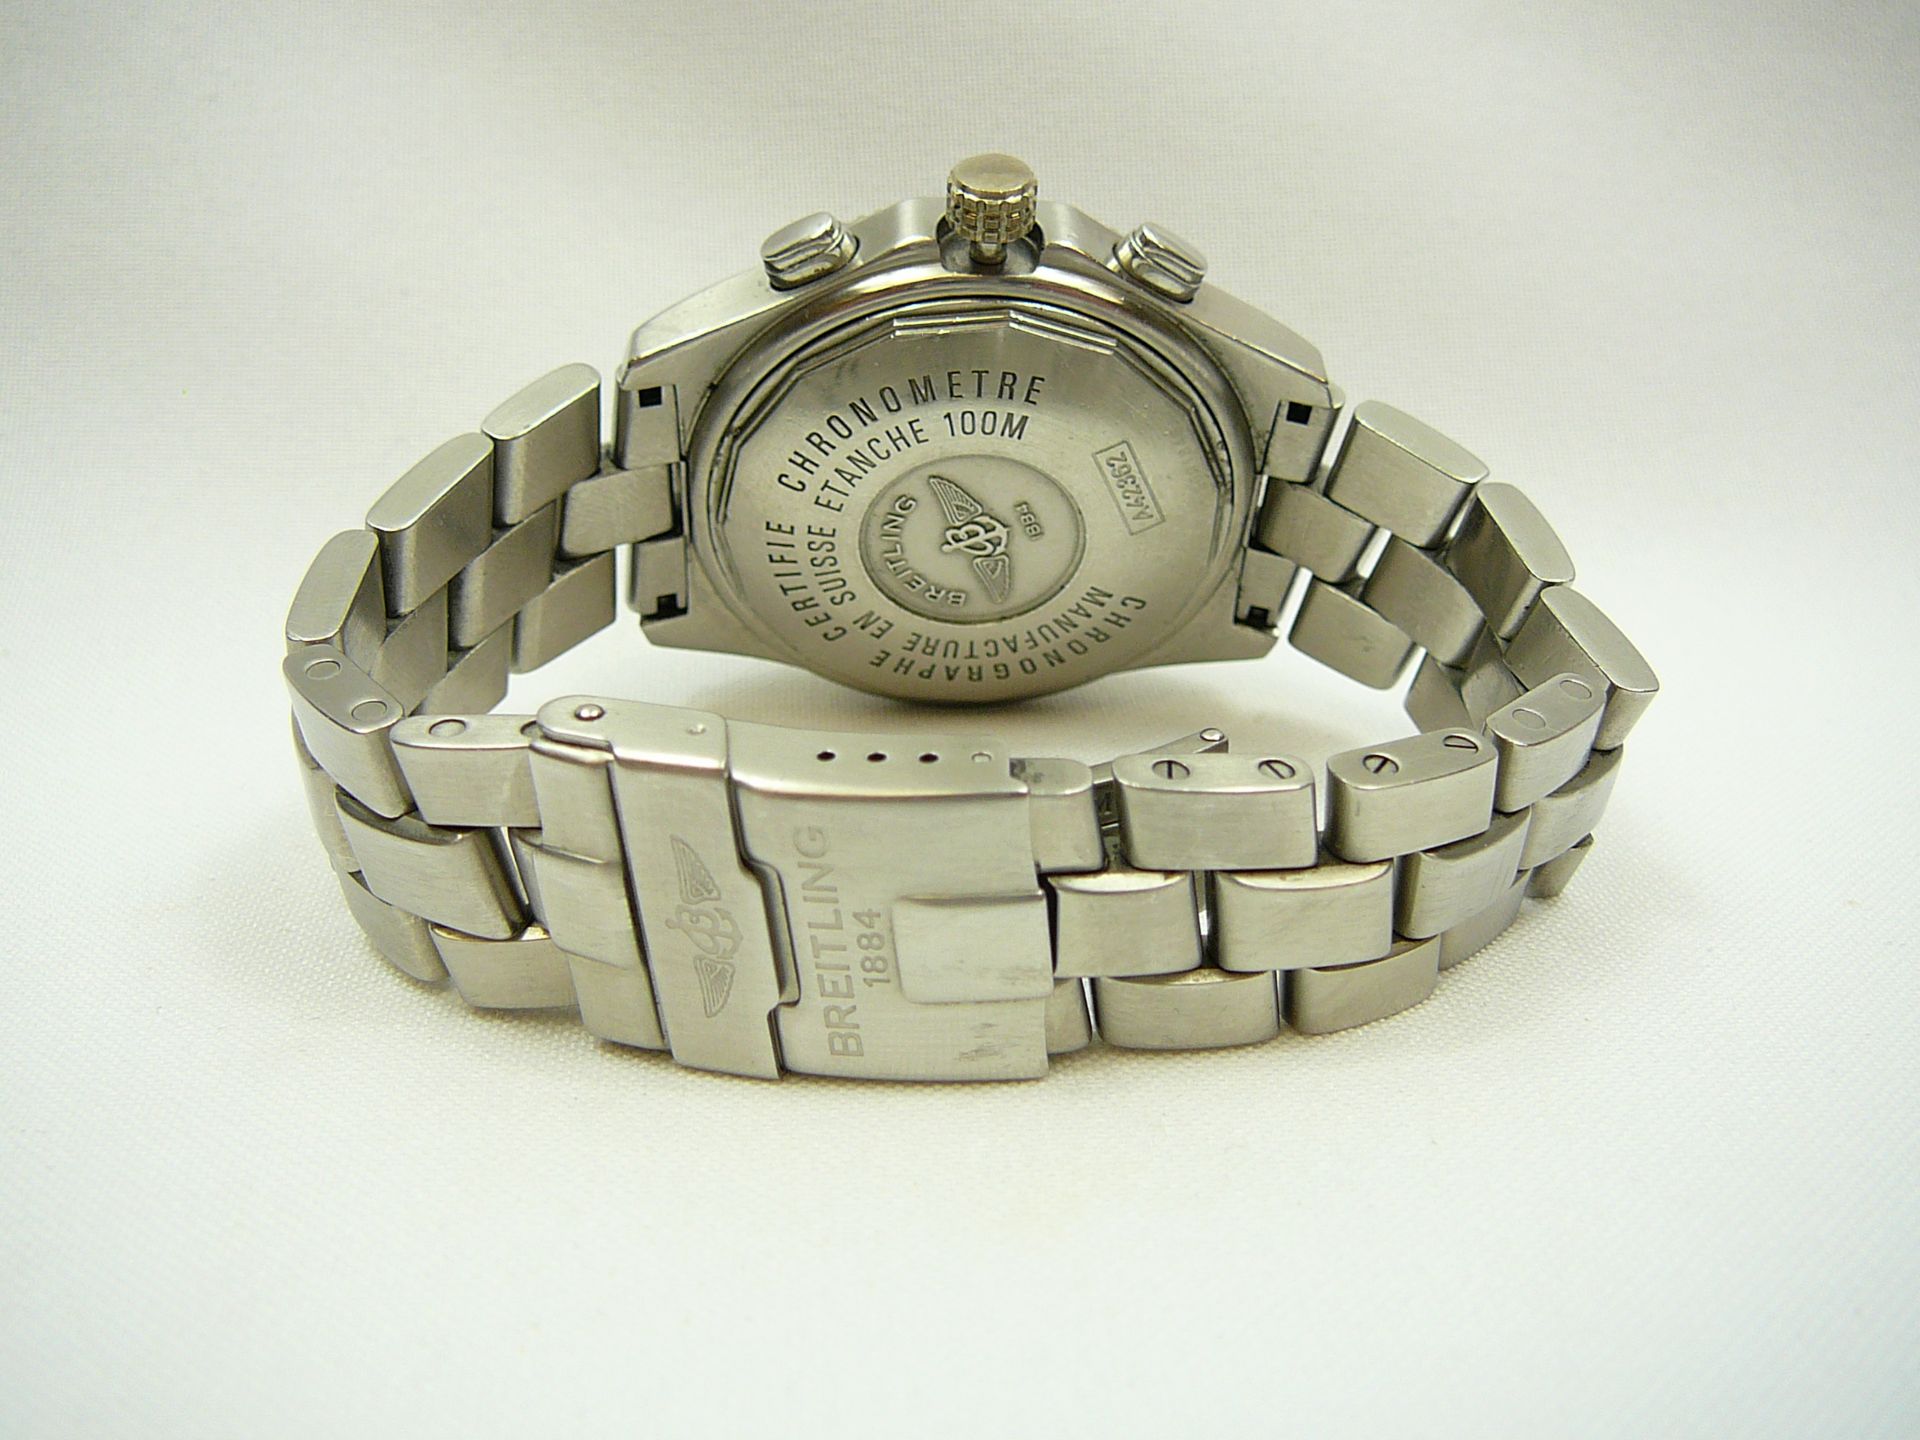 Gents Breitling Wristwatch - Image 3 of 3